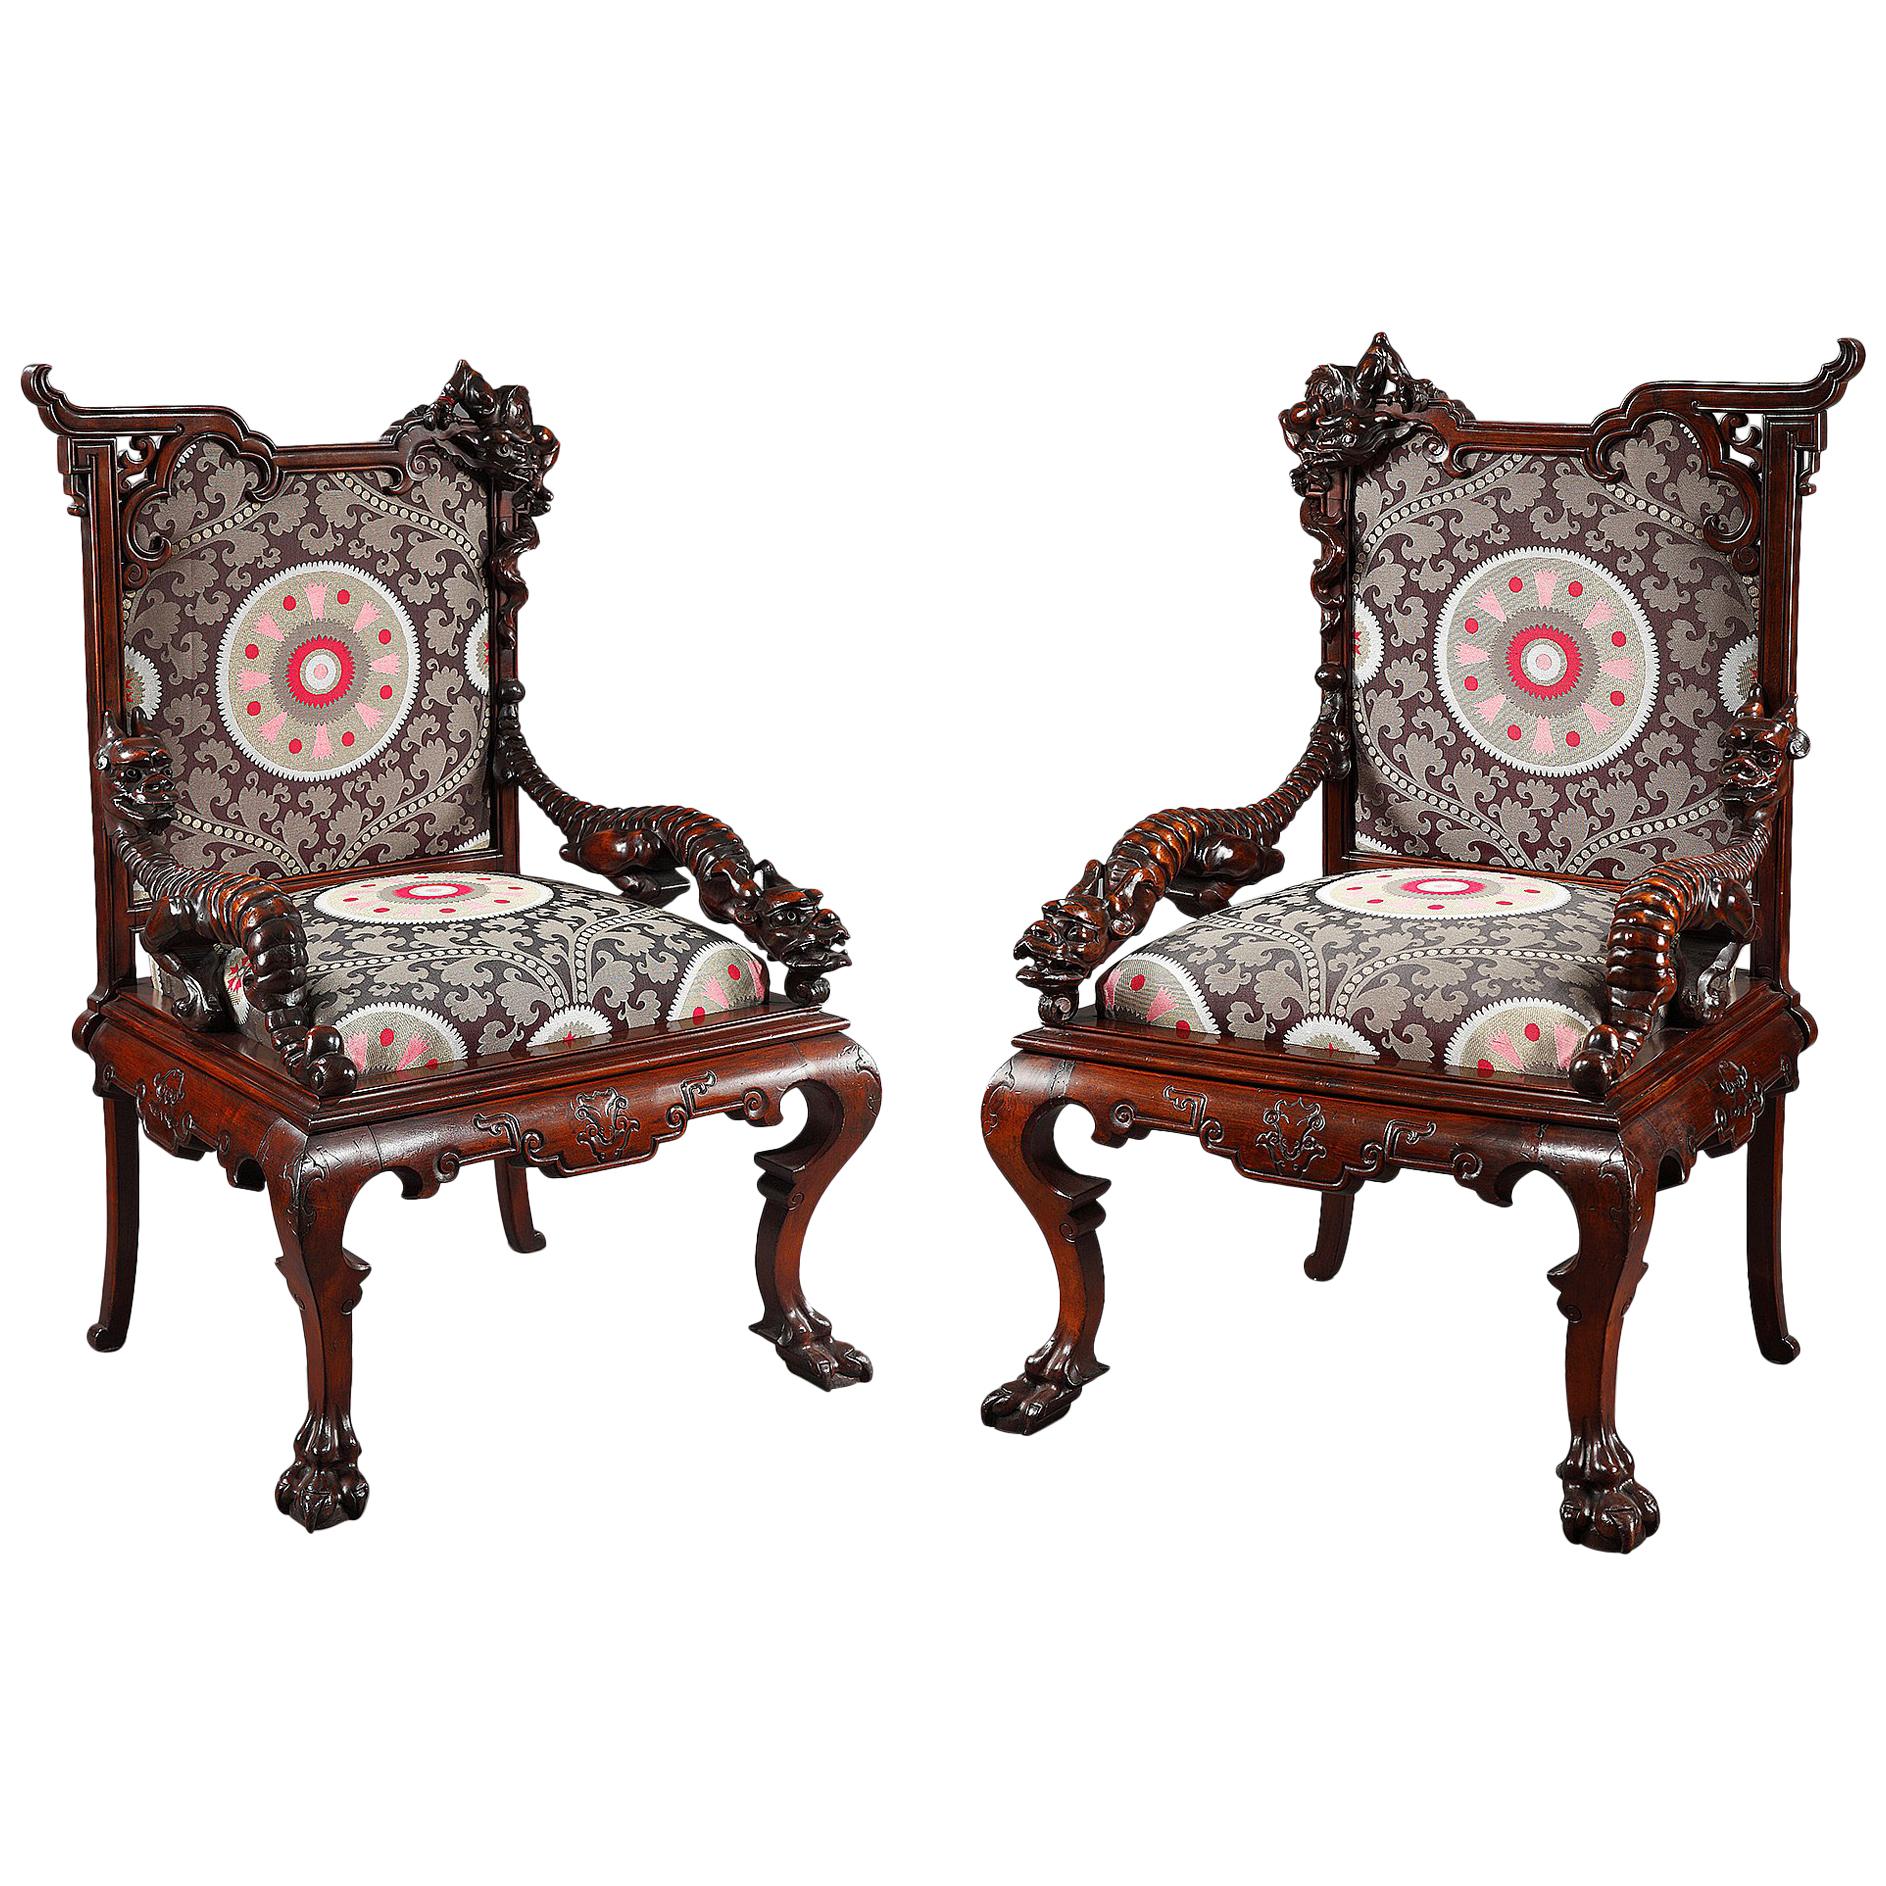 Pair of Aesthetic Movement Armchairs Attributed to G.Viardot, France, Circa 1880 For Sale